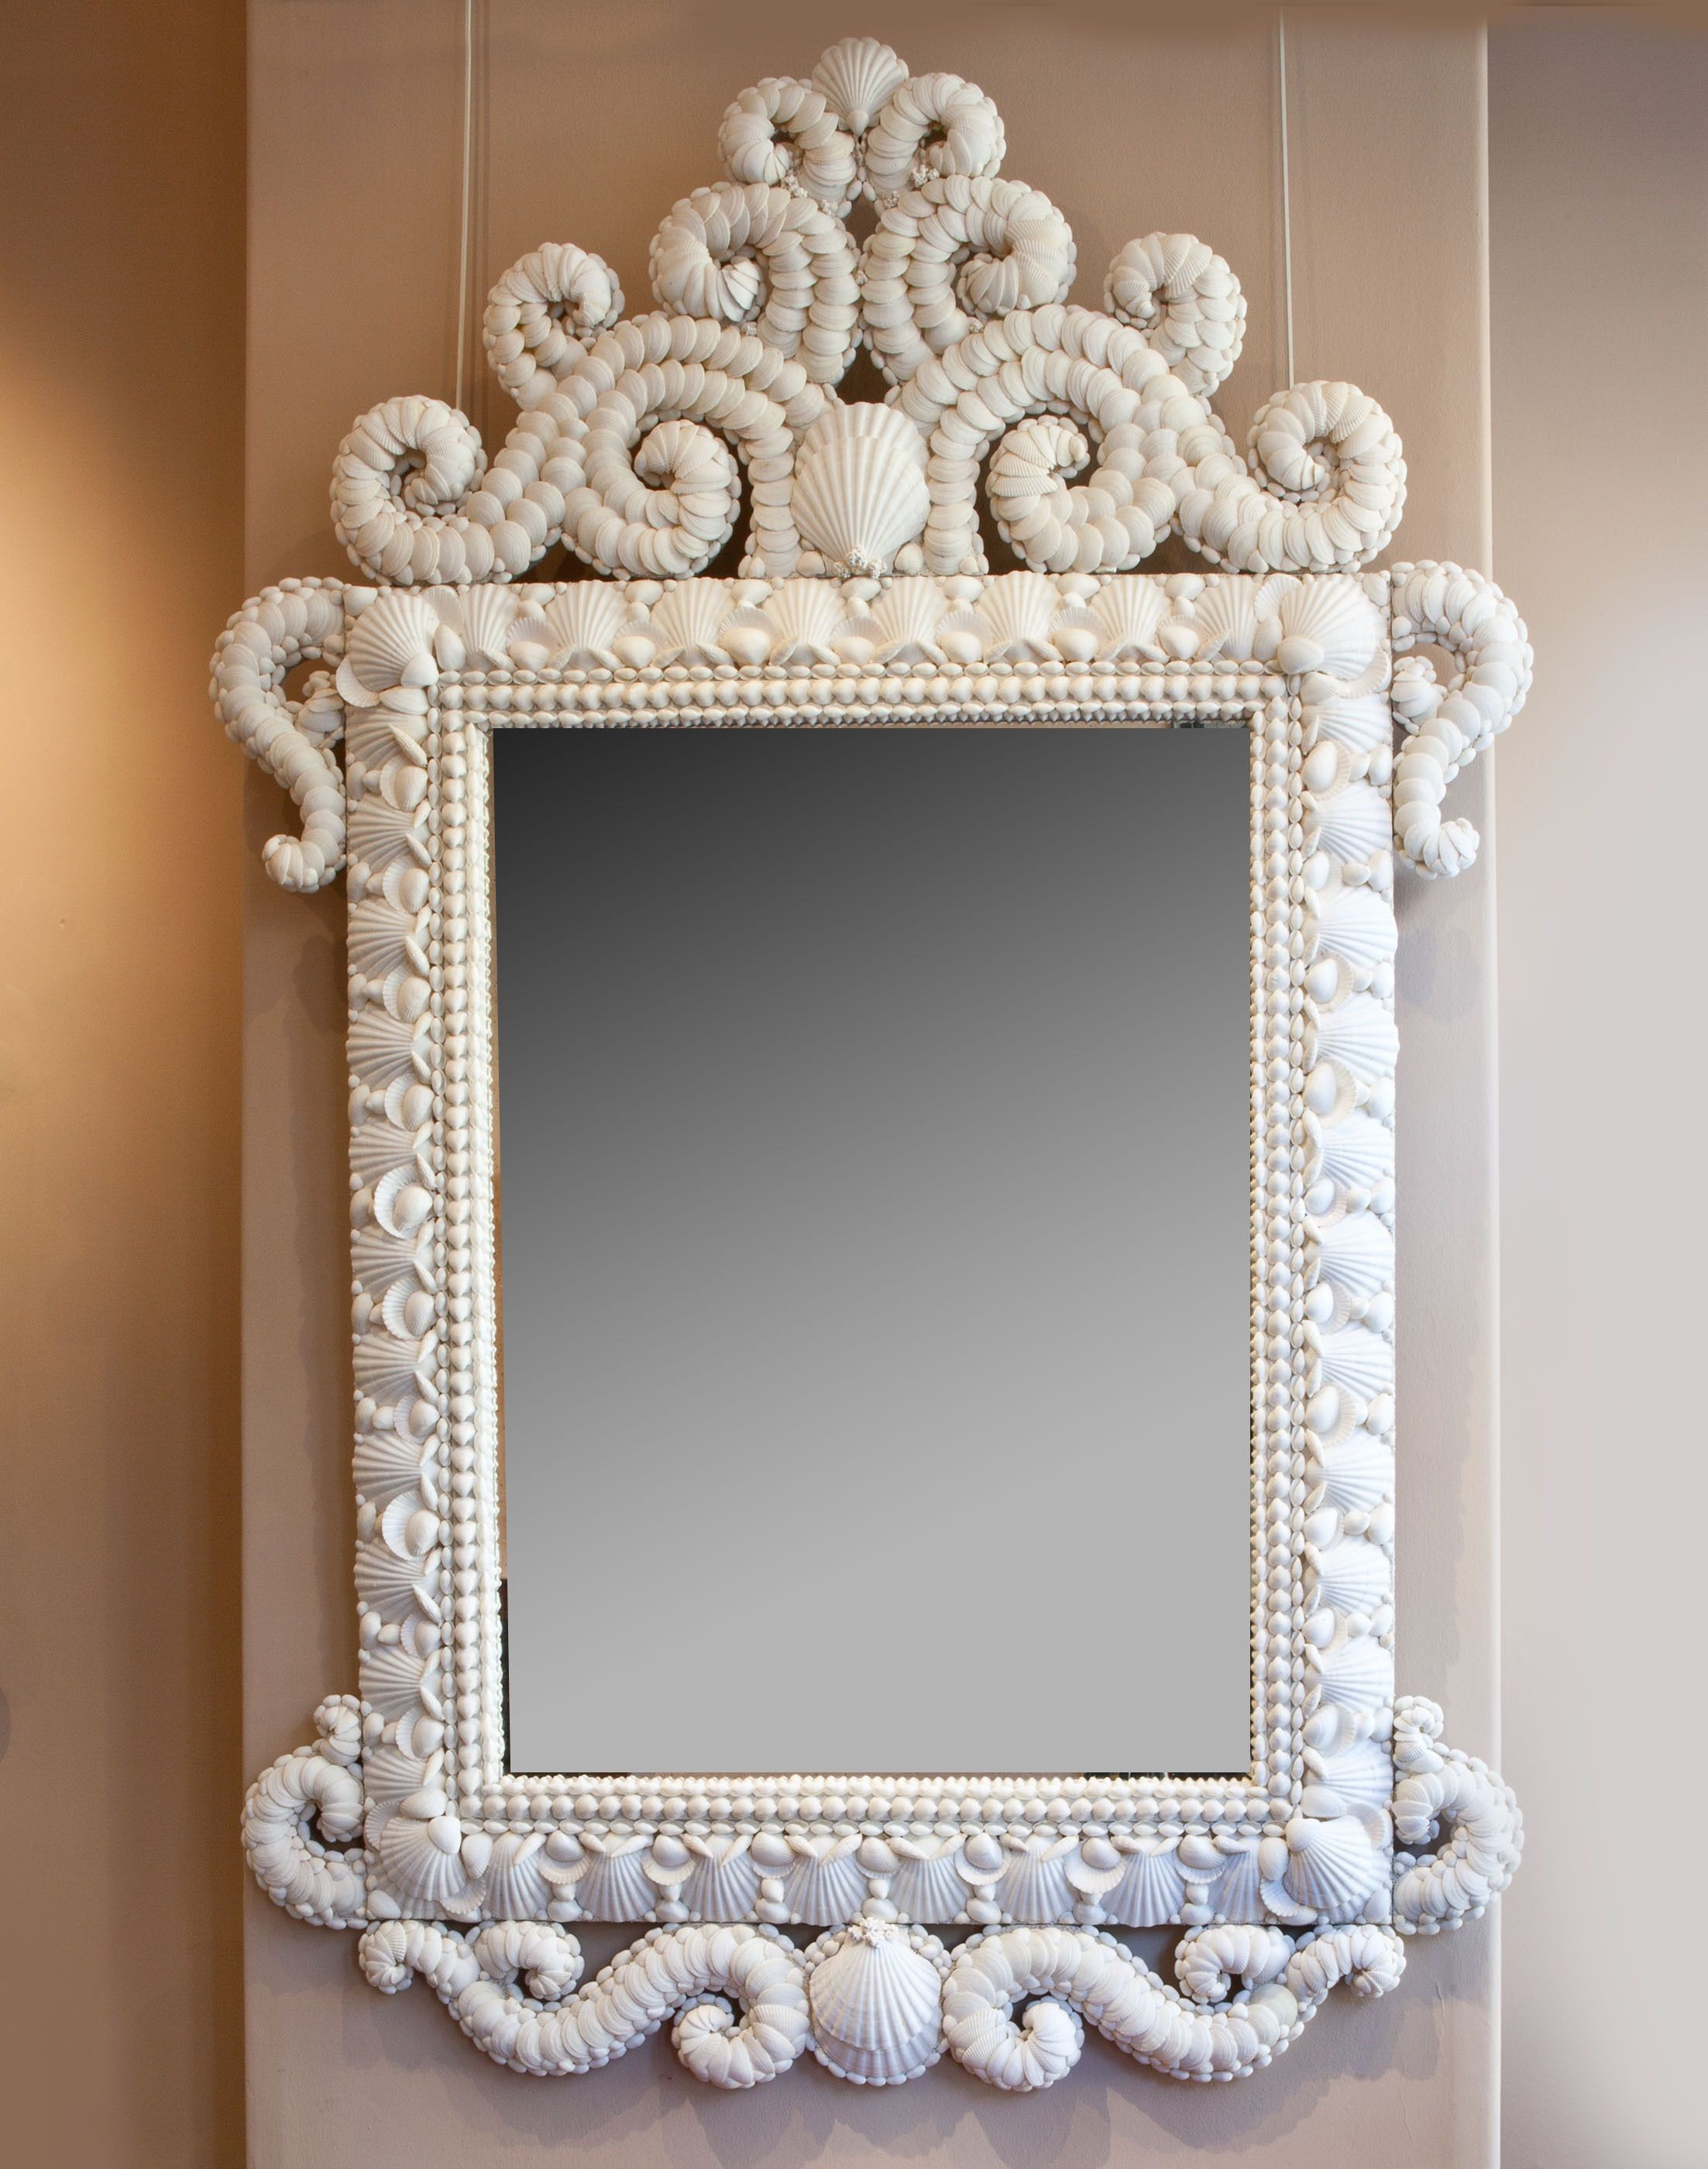 15 Recommended Mirror Cube Vase 2022 free download mirror cube vase of square mirror plates new a fine large scale white shell mirror pertaining to square mirror plates new a fine large scale white shell mirror nicholas wells antiques